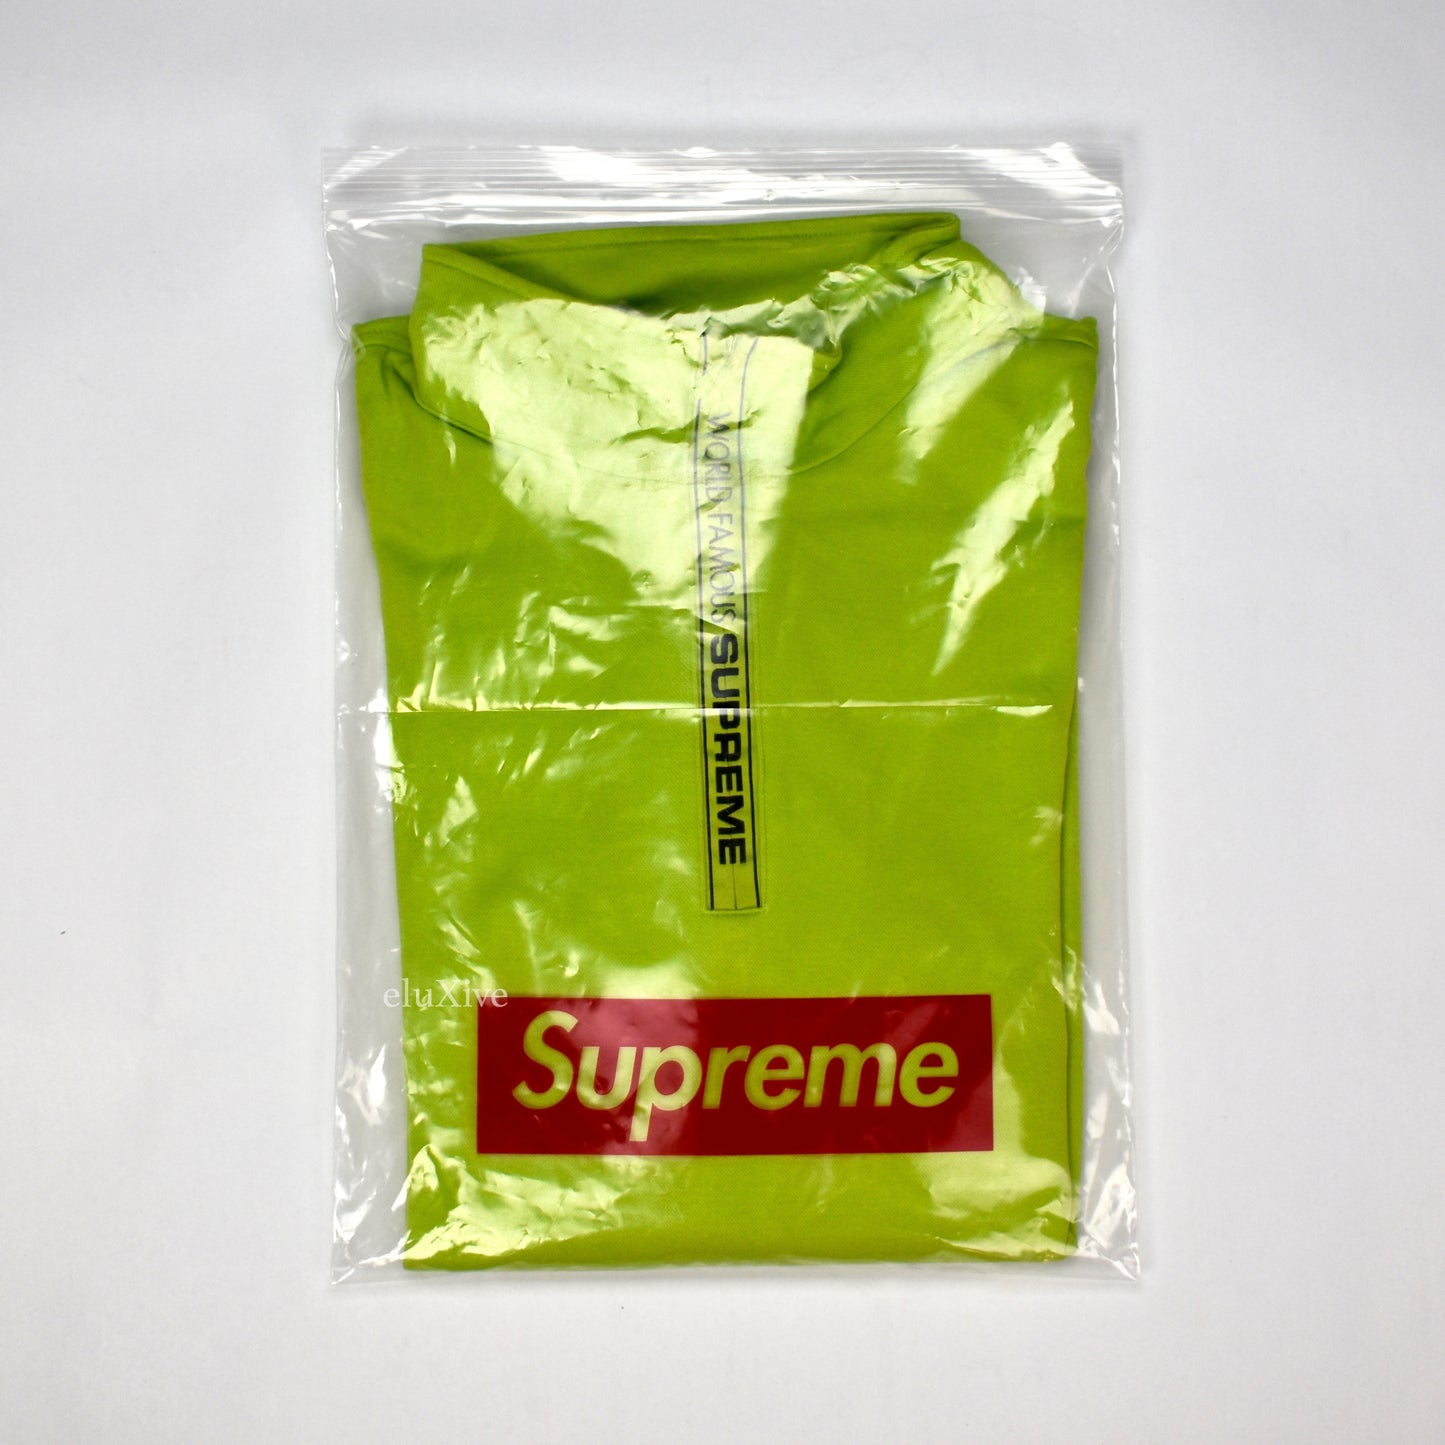 Supreme - Lime 'World Famous' Logo Pullover